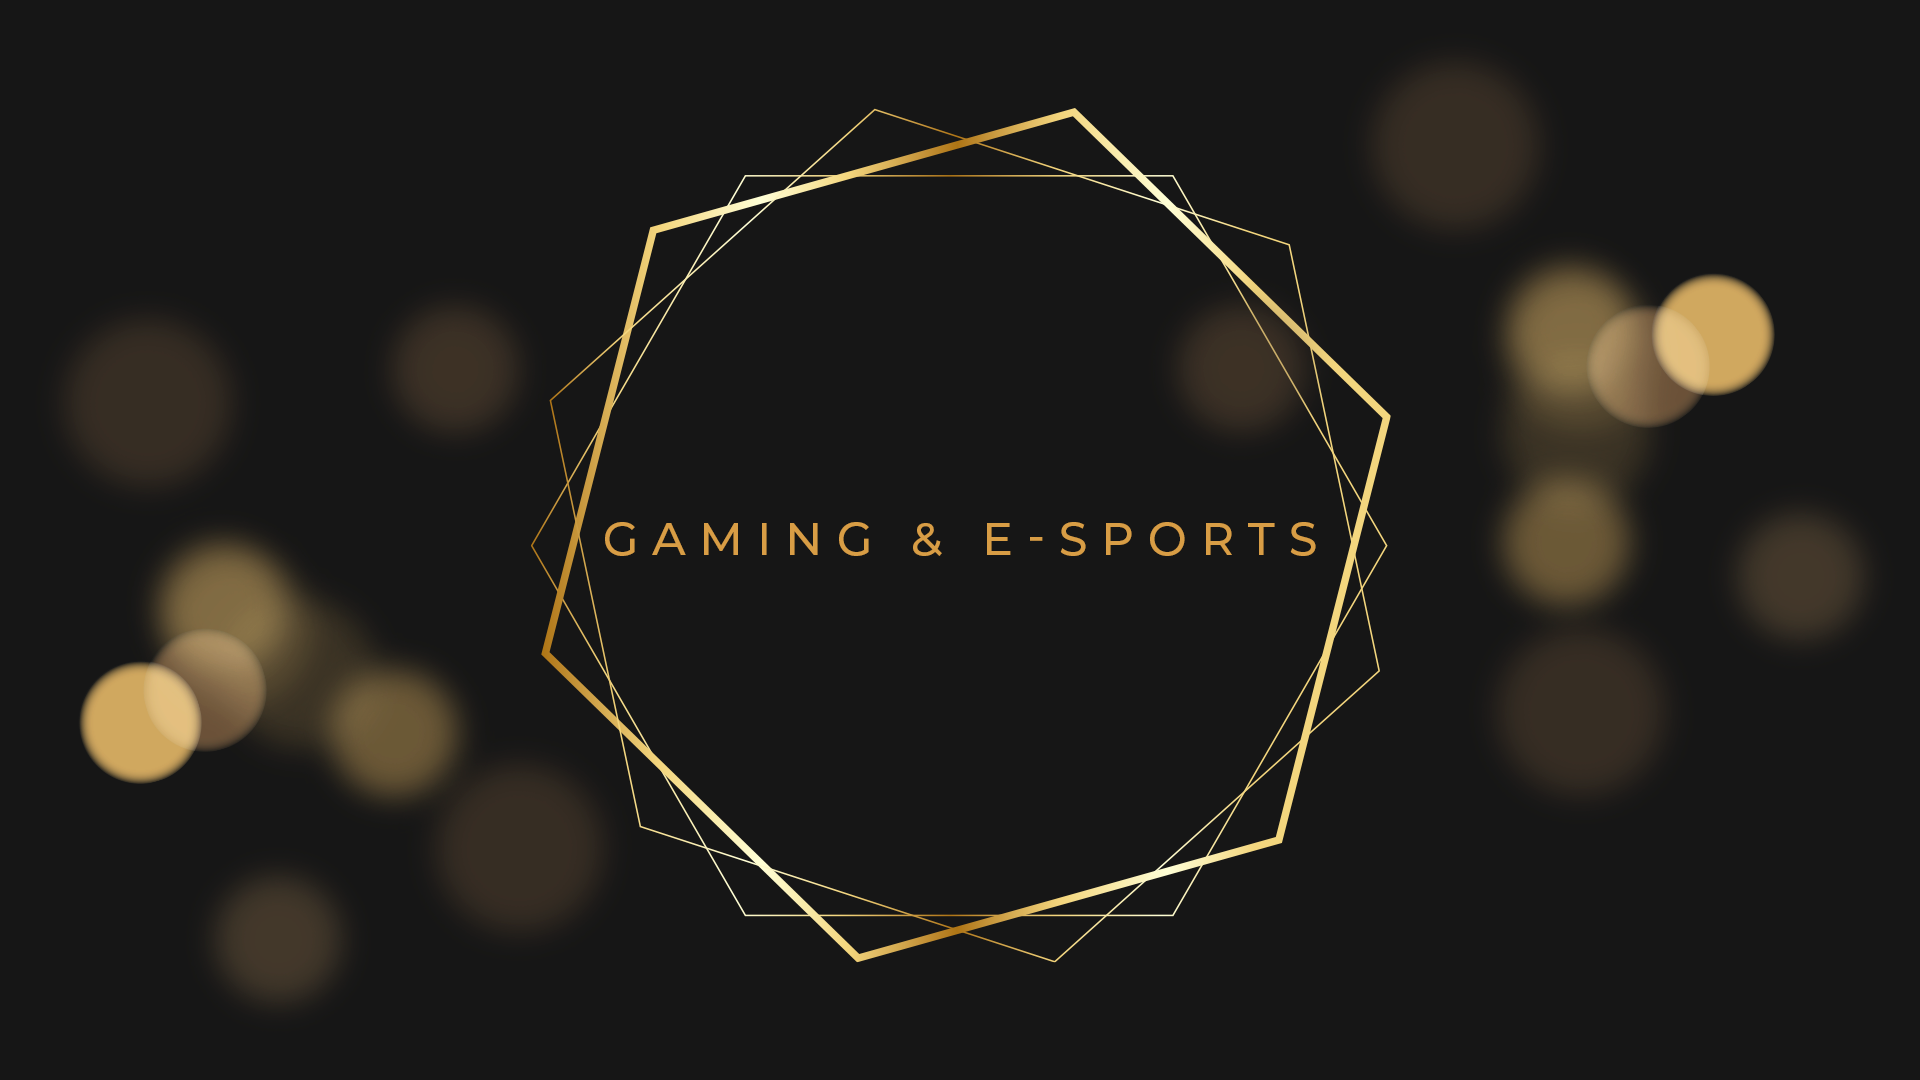 Gaming & e-Sports